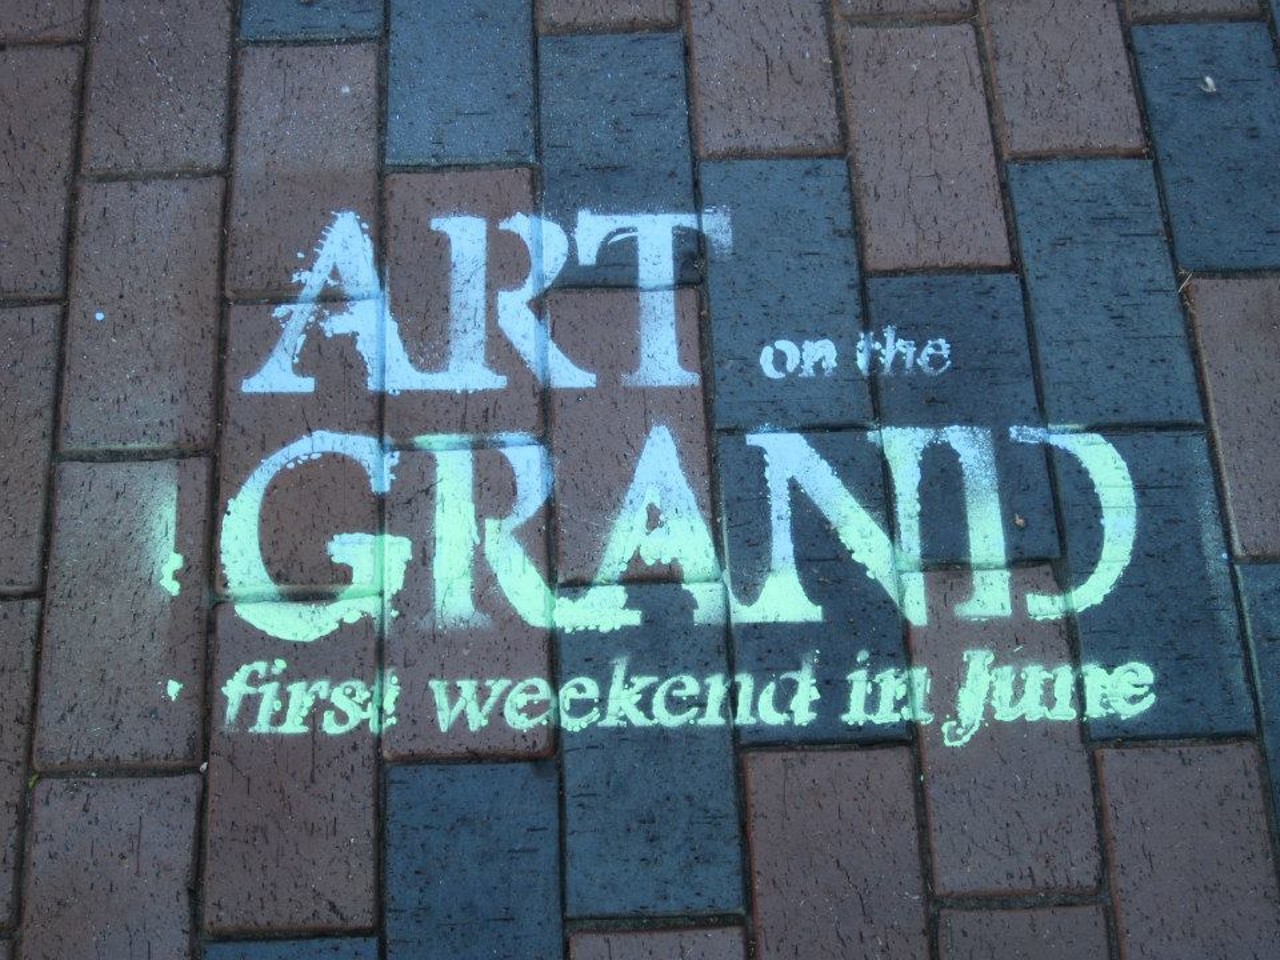 Sat-Sun, 5/4-5 - 
Art on the Grand 
@ Downtown Farmington - 
Yet another one of the delicious summer art fairs that take place every summer in every city in Michigan, the Art on the Grand is Farmington Hills&#146; grand art show on Grand River. There will be sidewalk shopping, hands-on art for kids, alfresco dining, and 100 artists showcasing (and selling!) their works in every medium imaginable. Think: painting, pottery, jewelry, metal, sculpture, mixed media, photography, glass, and more. 
Runs 10 a.m.-7 p.m. Saturday and 11 a.m.-5 p.m. on Sunday; downtownfarmington.org; free entry. Photo via Facebook.